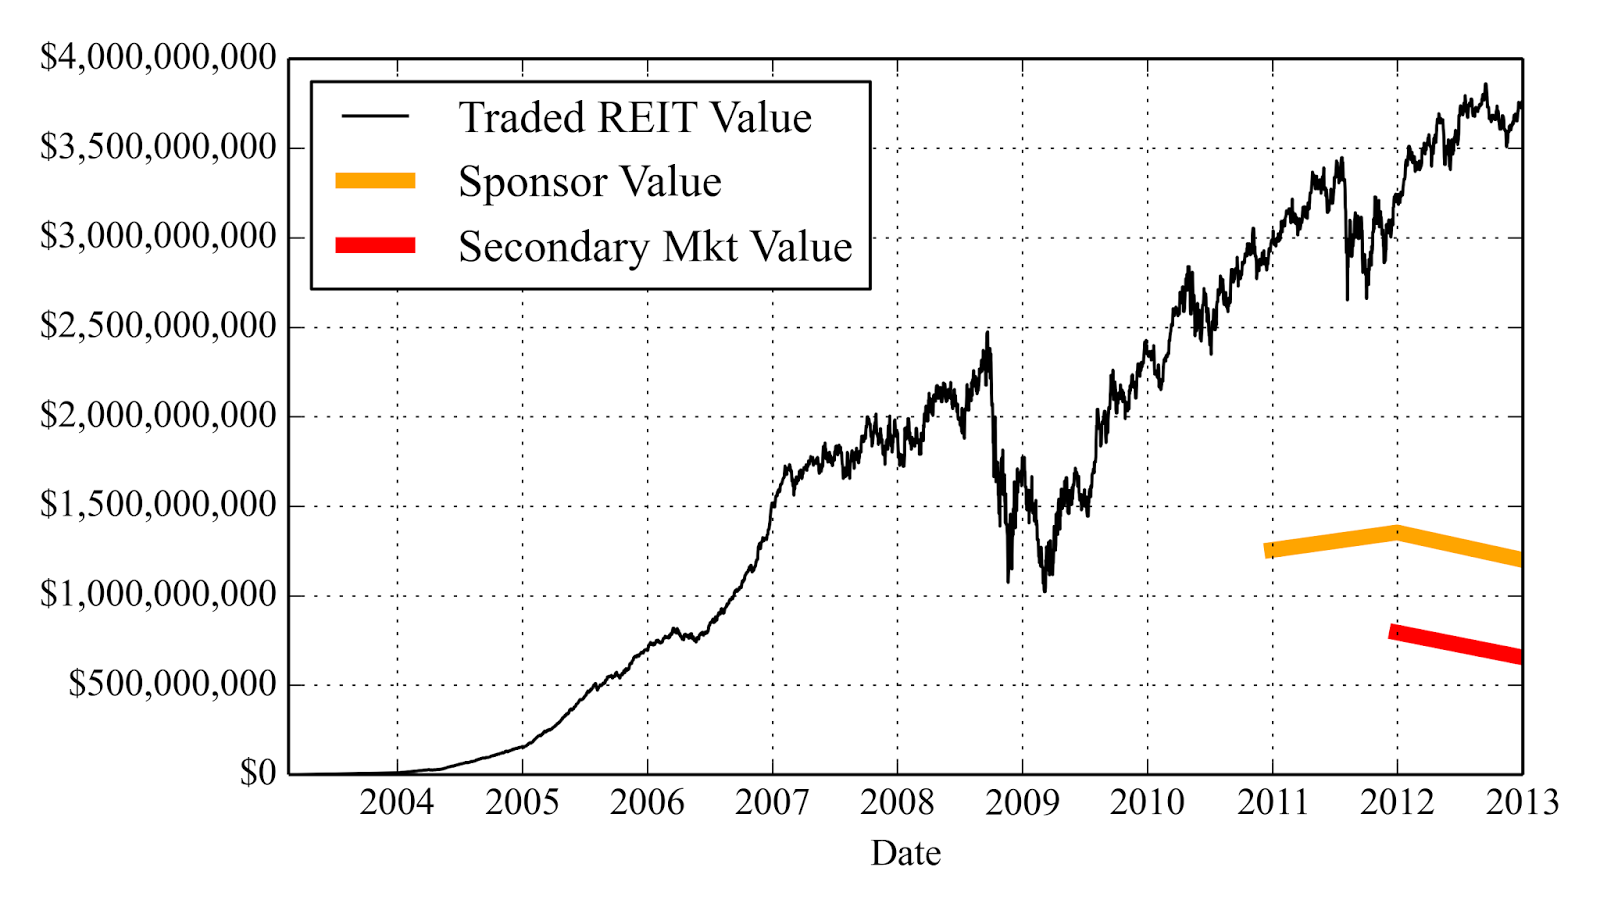 A figure showing a line graph demonstrating investors' net investments in BH REIT I applied to Vanguard Traded REIT Fund from 2004 to 2013.